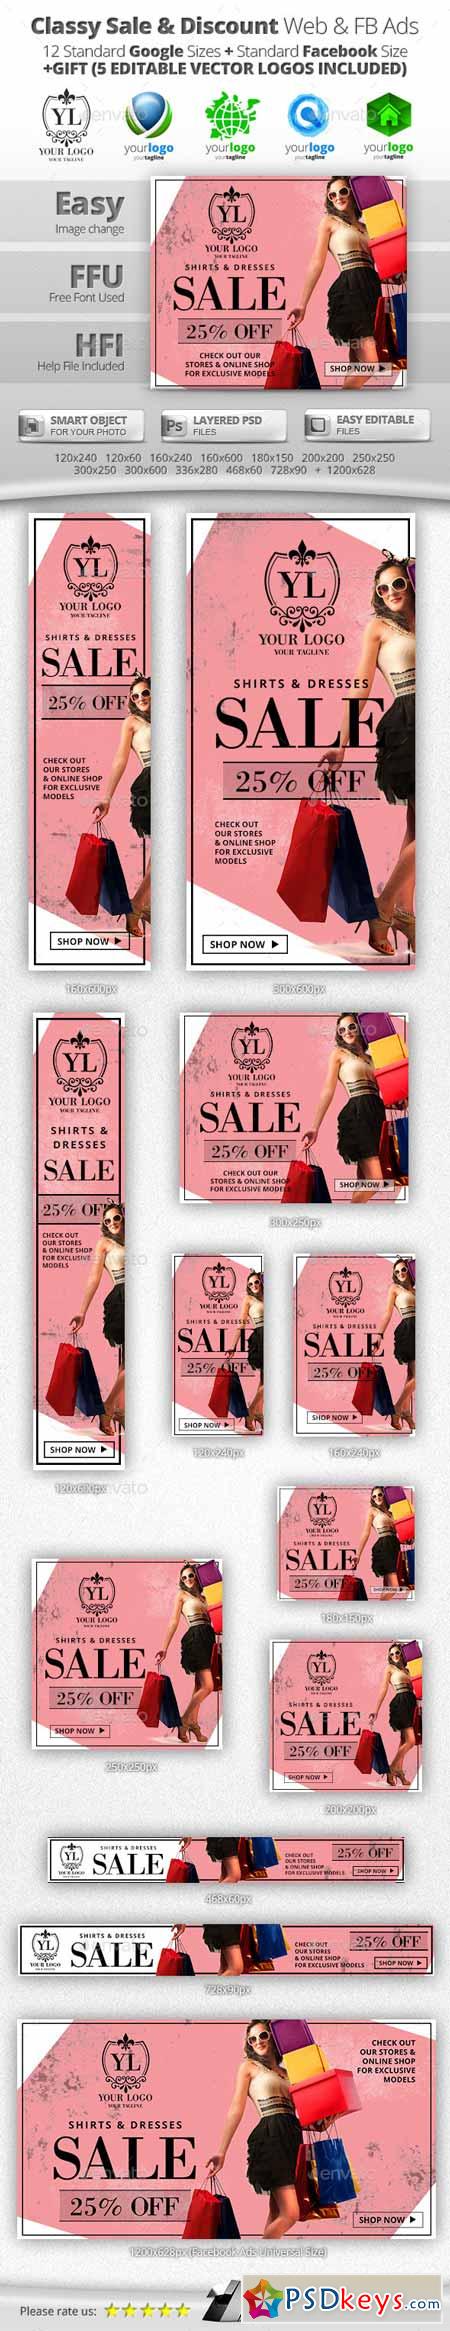 Classy Sale & Discount Web & Facebook Banners 11406915